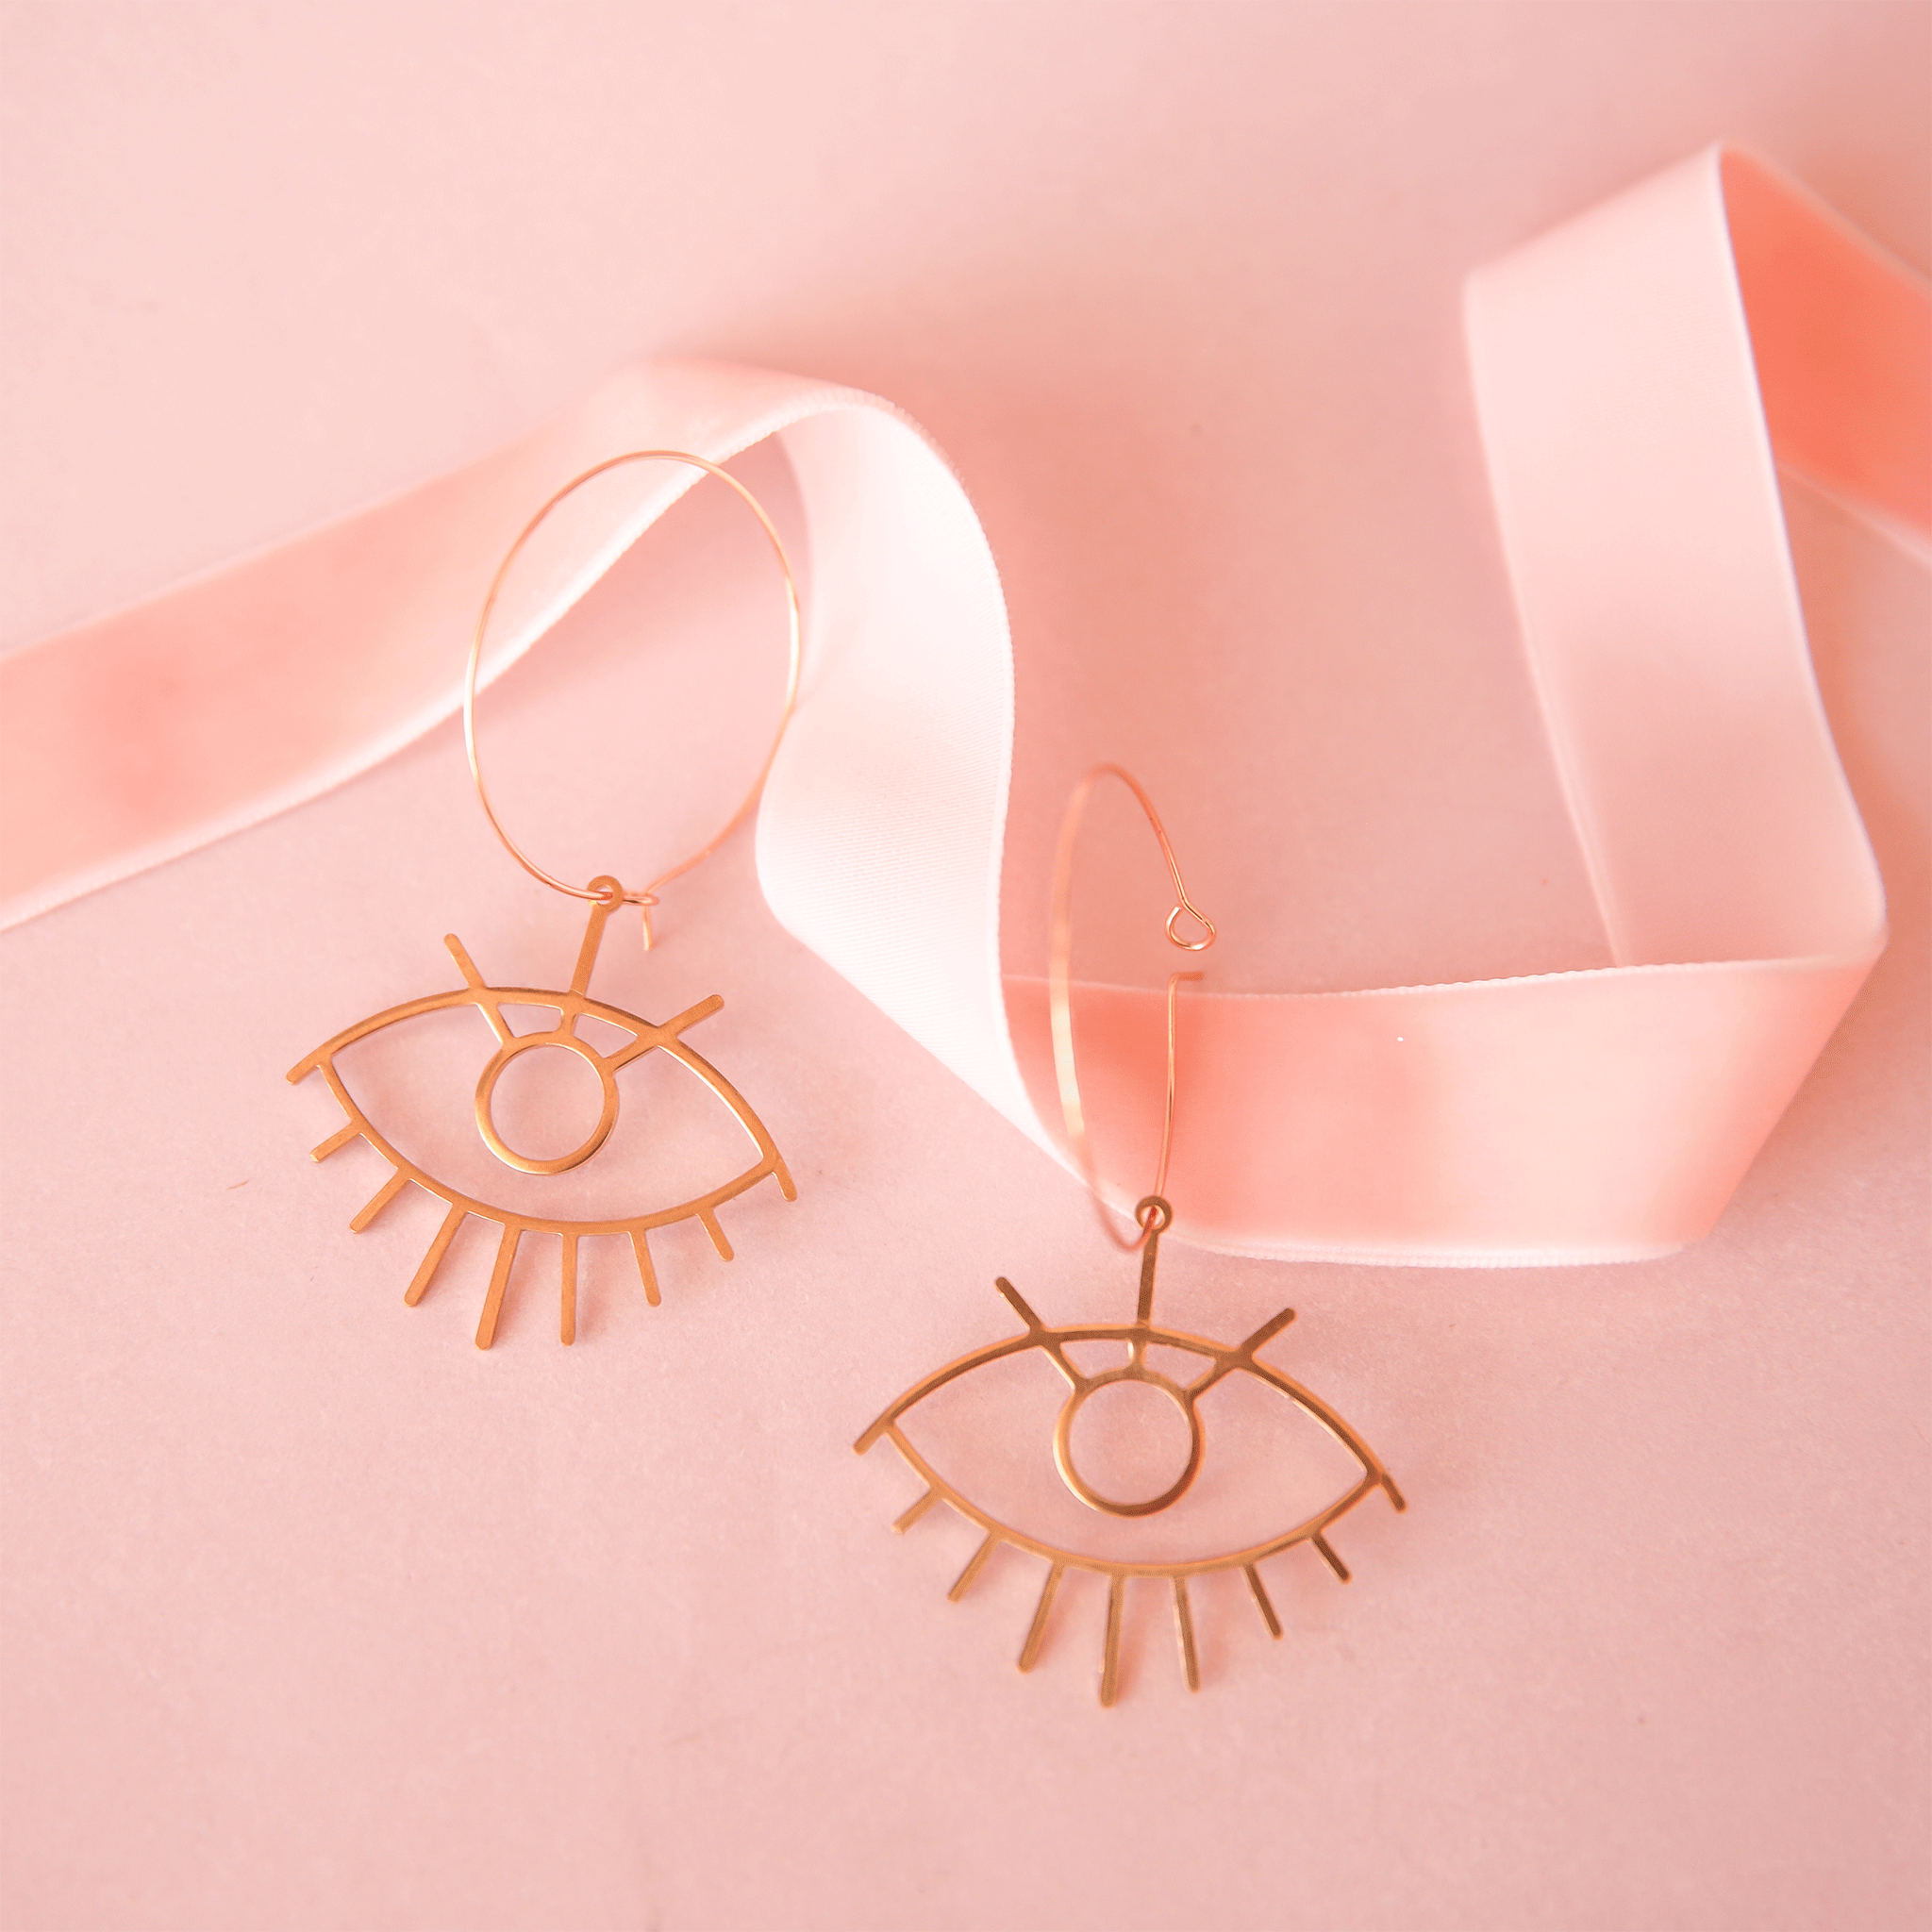 On a pink background is a pair of thin gold hoops earrings and an eye shaped charm hanging from the bottom of the hoops. 